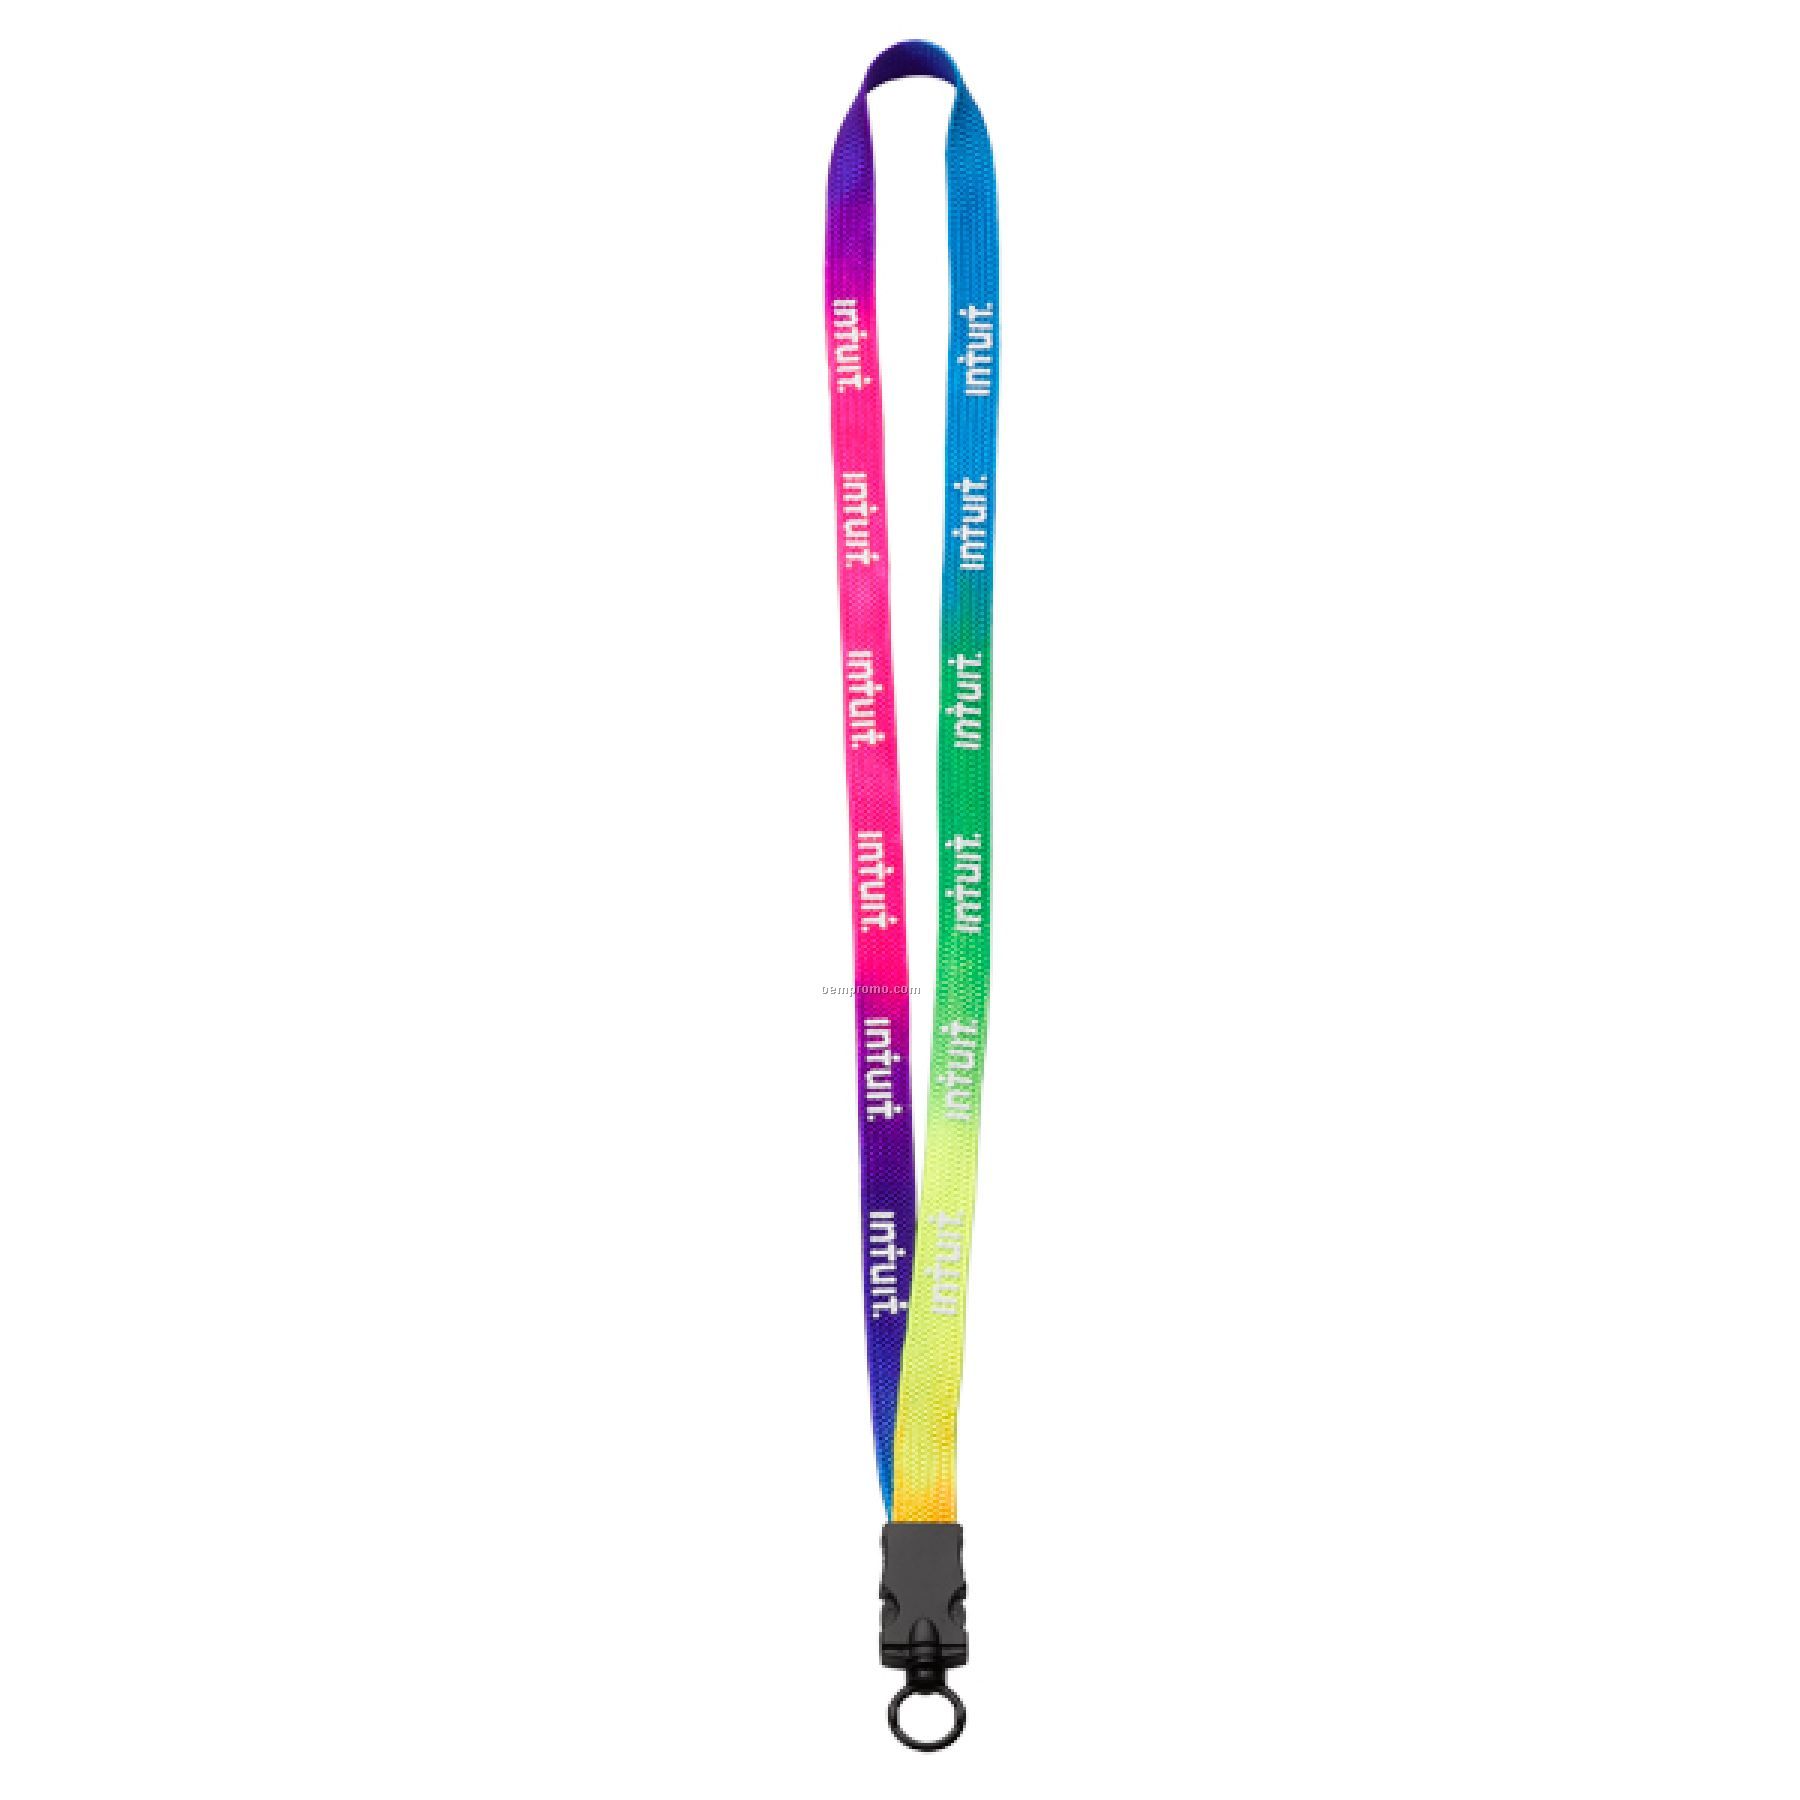 1/2" Tie Dye Lanyard With Plastic Snap Buckle Release & O-ring